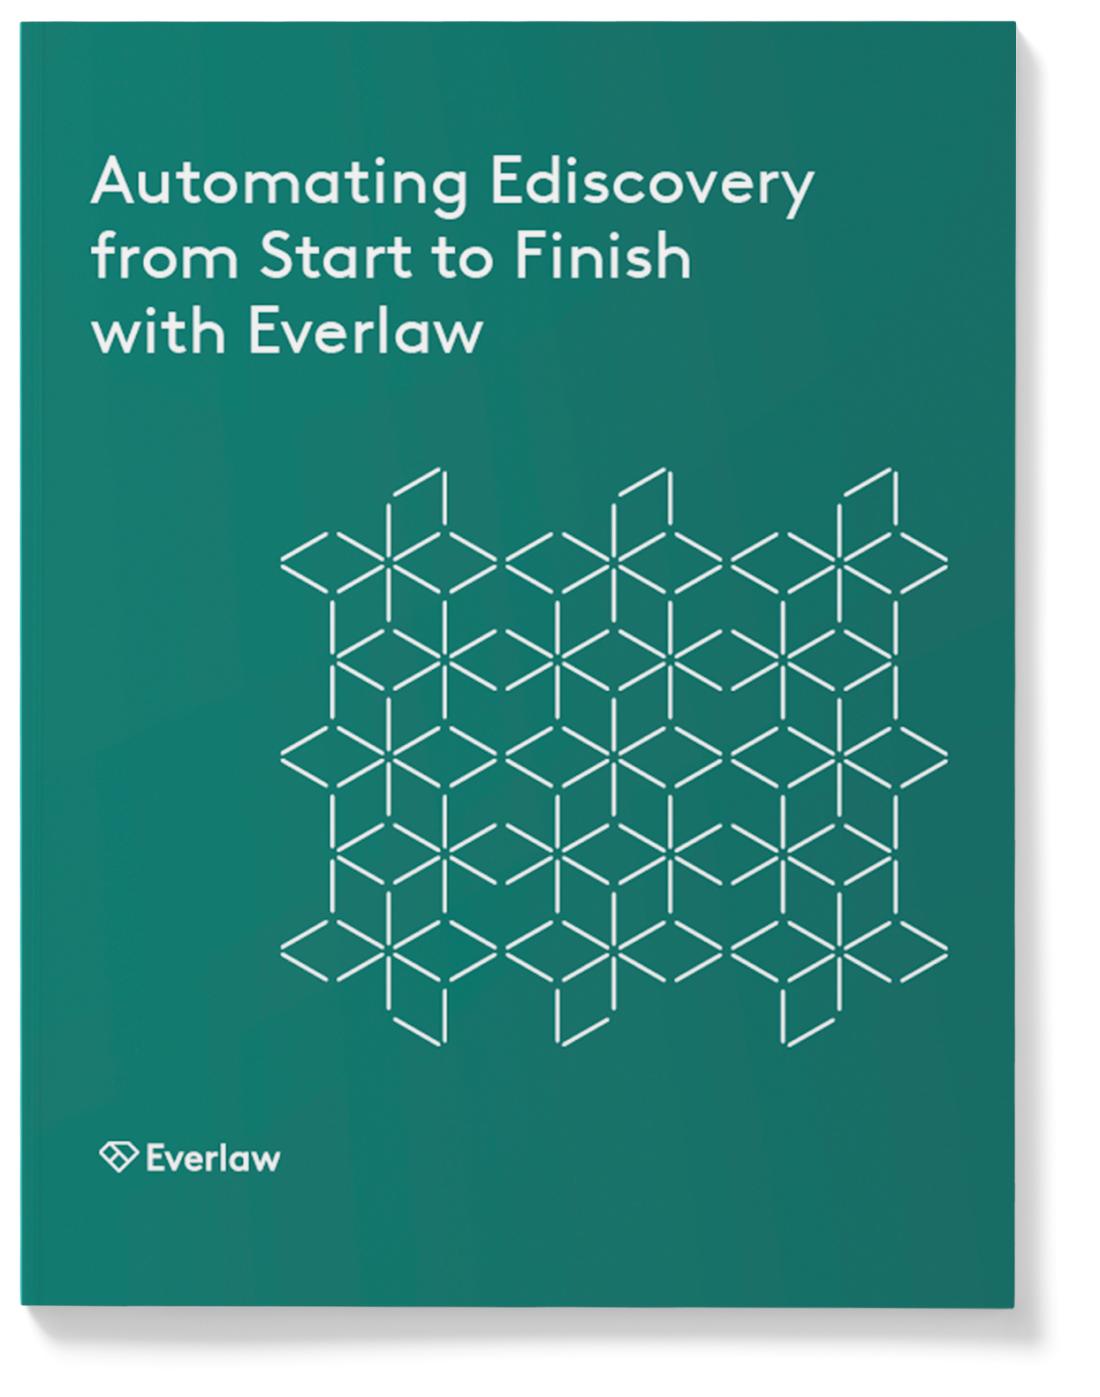 Updated WP Thumbnail Automating Ediscovery from Start to Finish with Everlaw